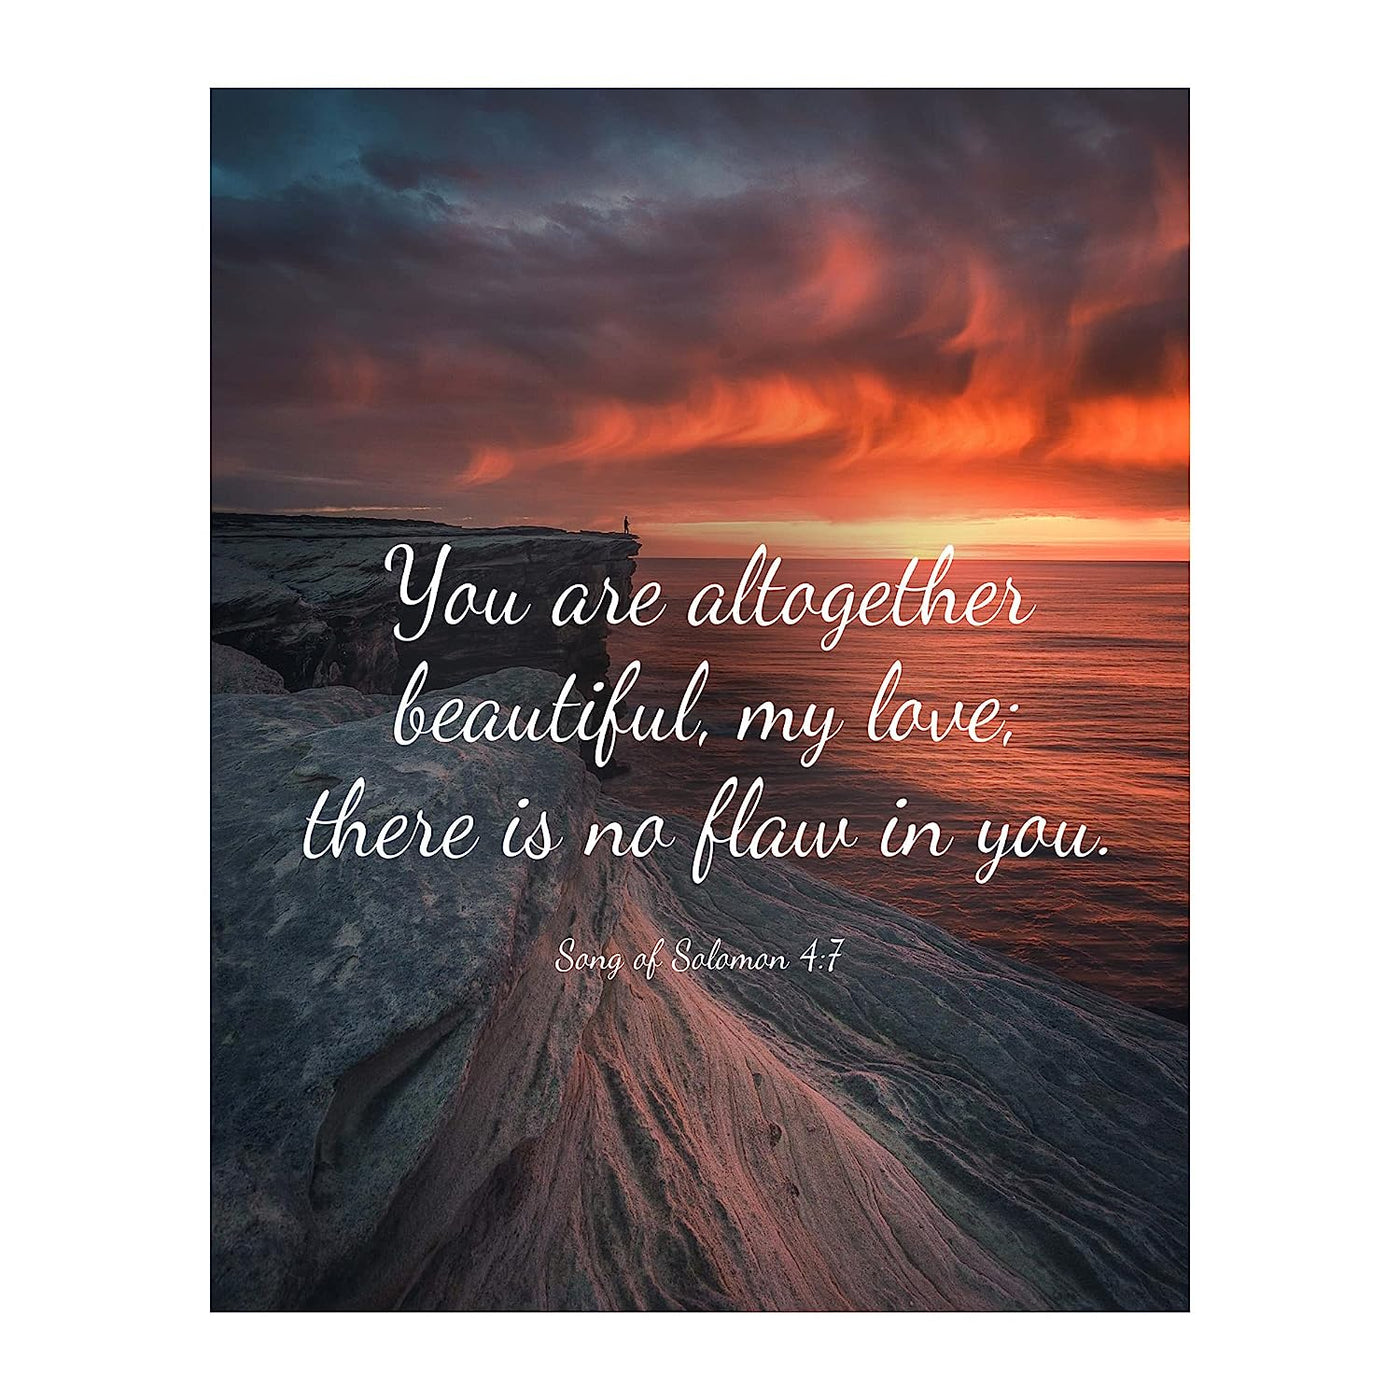 You Are Altogether Beautiful- Song of Solomon 4:7- Bible Verse Wall Print-8x10"- Sunset Scripture Wall Art-Ready to Frame. Home-Office-Bedroom Decor. Great Christian Gift for Ladies-Young & Old.